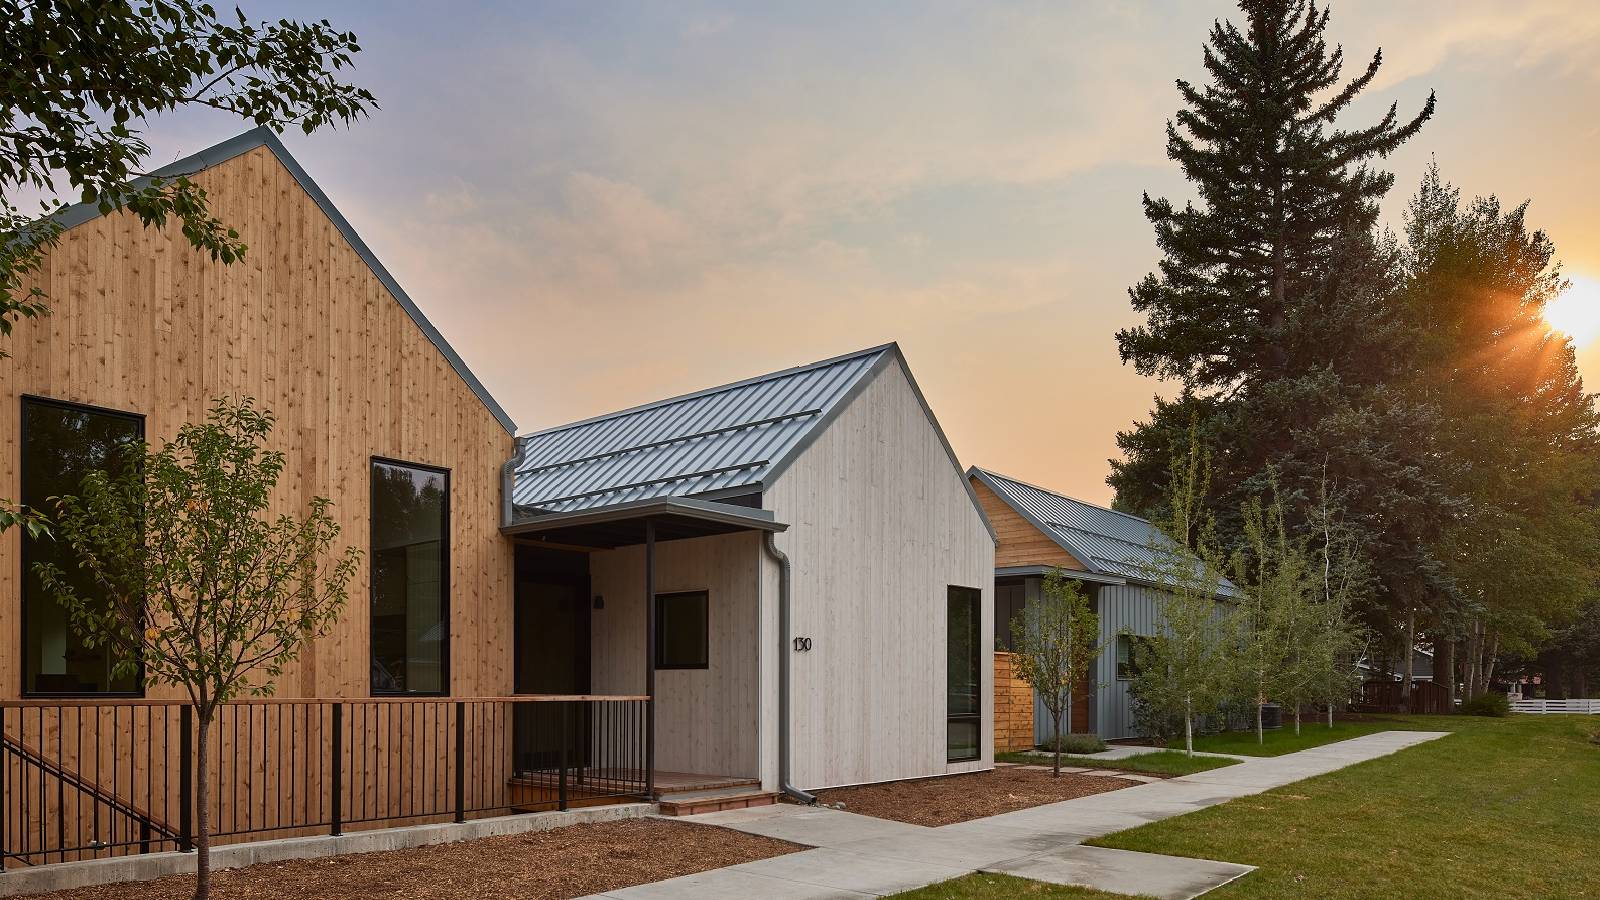 Exterior view of Double Hansen, a custom duplex designed and built by Farmer Payne Architects.